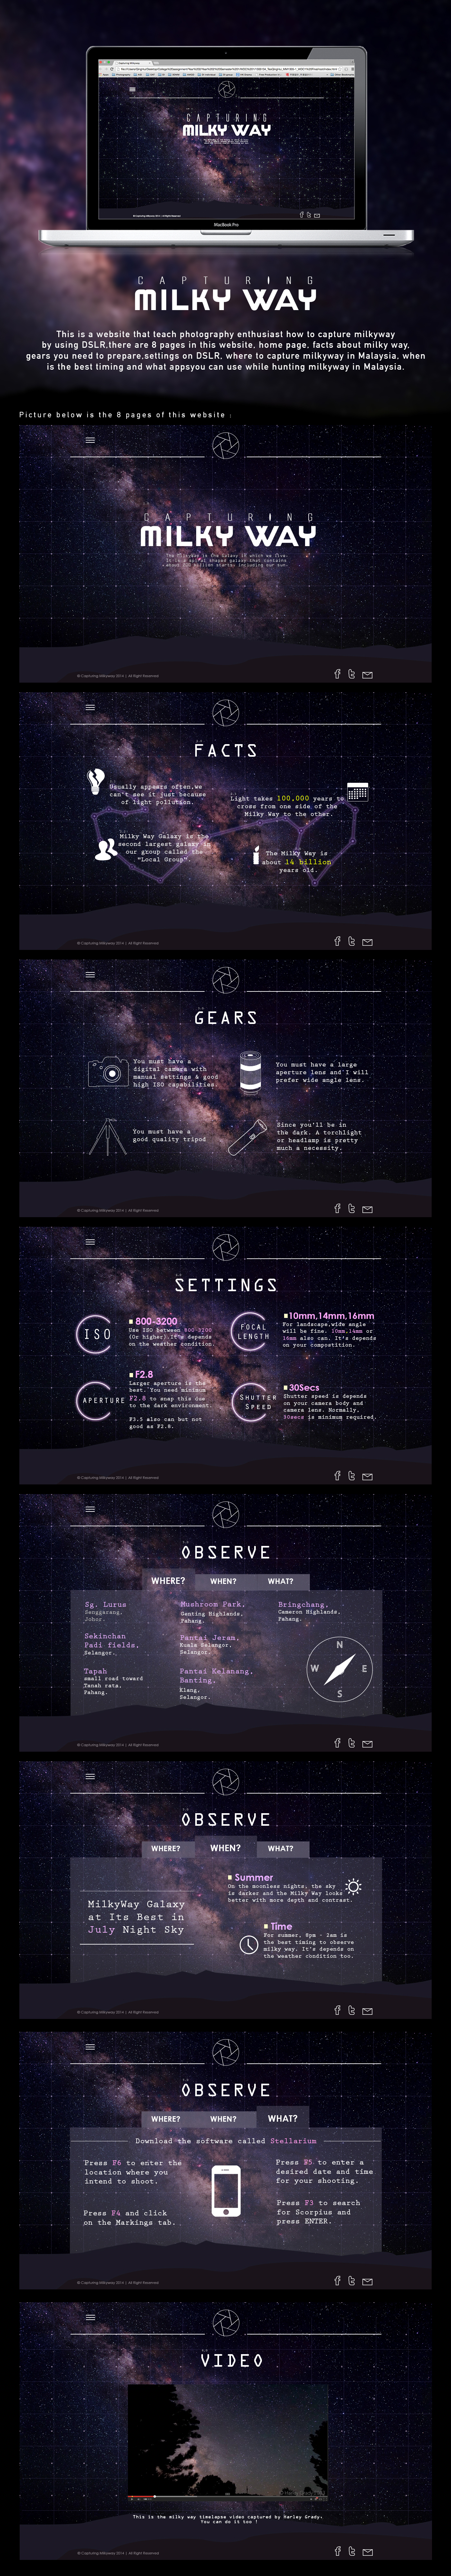 Web design tutorial capturing milkyway Facts gears settings manual camera Observe malaysia Layout stars element